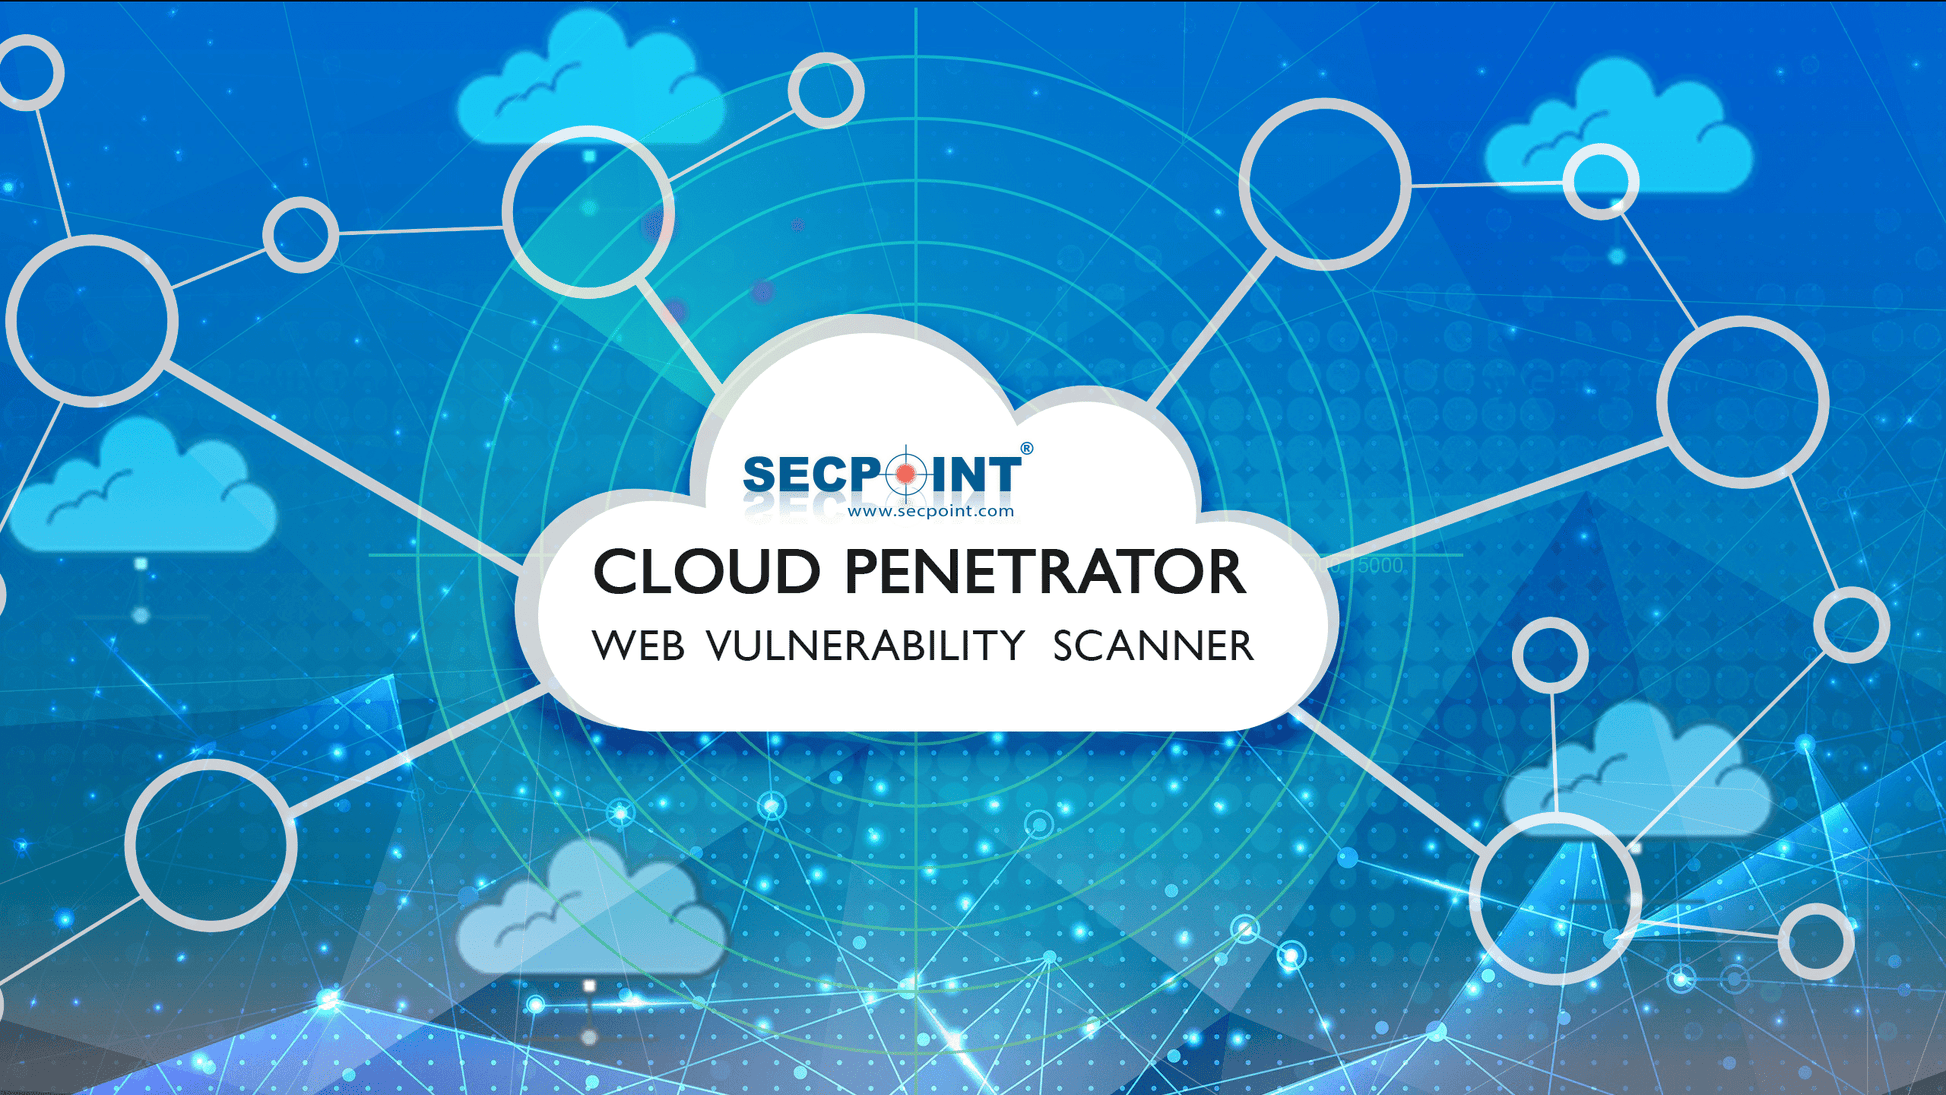 SecPoint Cloud Penetrator S9 - Vulnerability Scanning of 16 IP Static Scan License for 3 Years - SecPoint